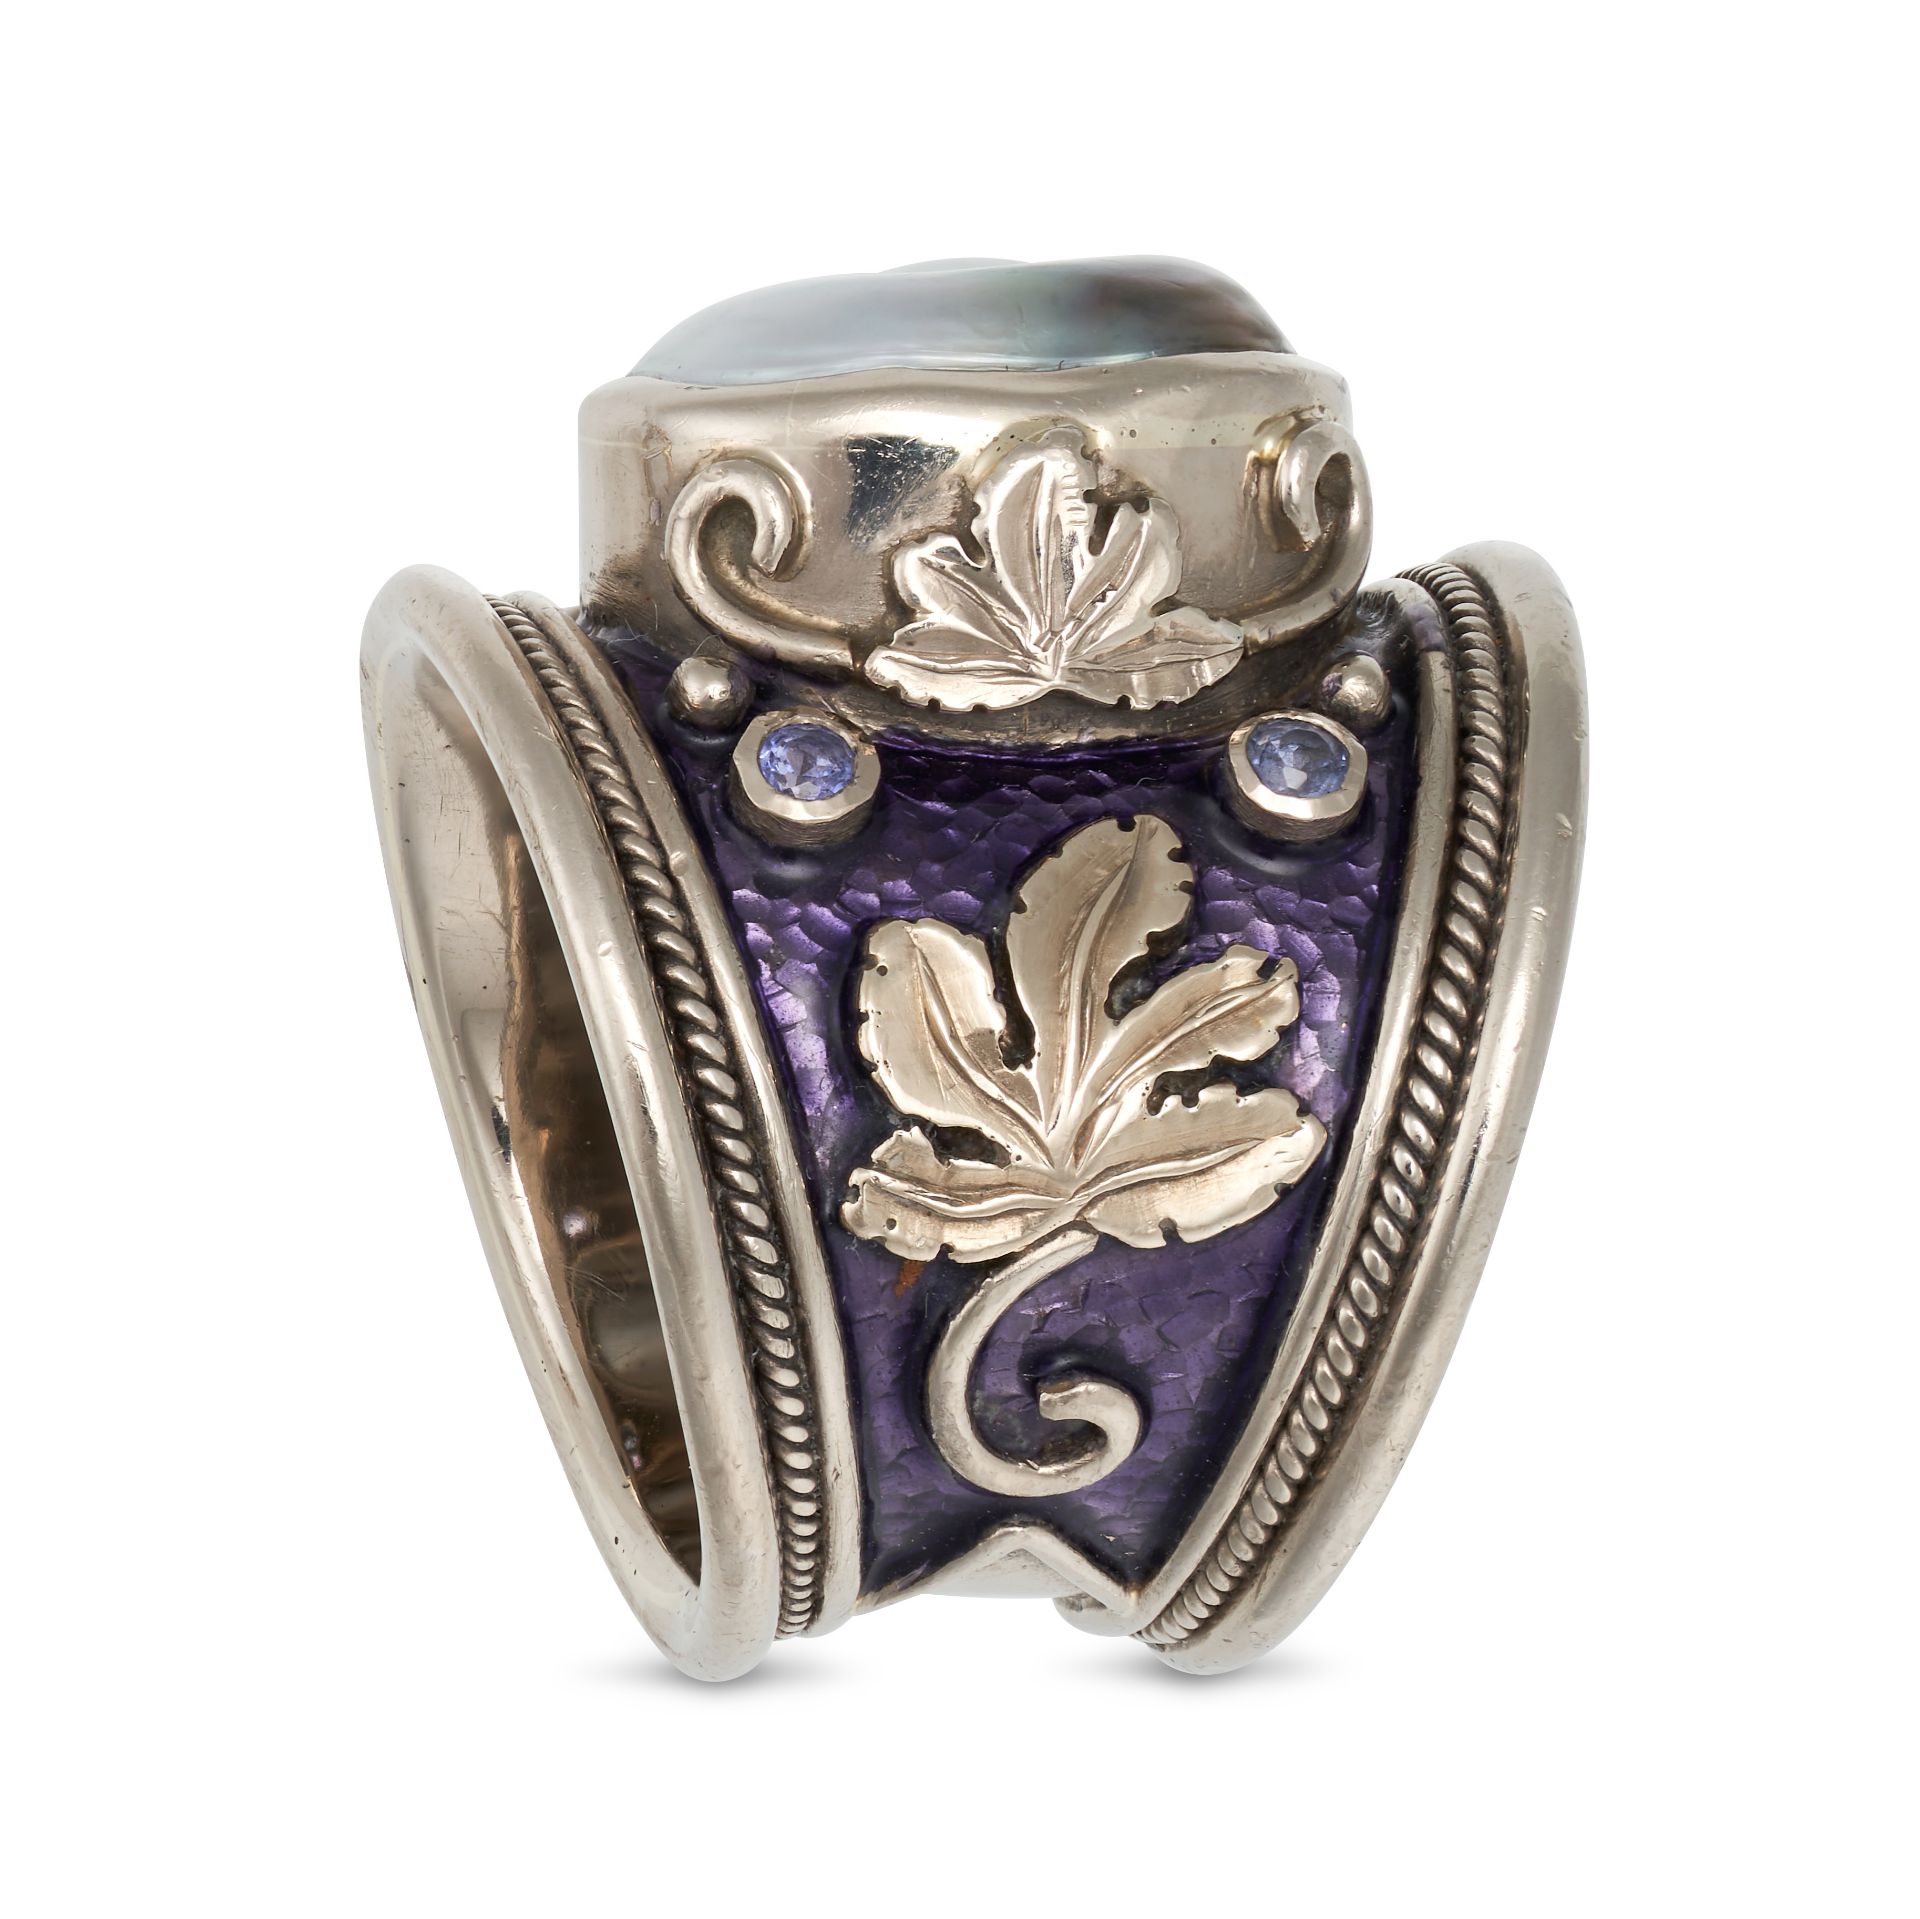 ELIZABETH GAGE, A KESHI PEARL, TANZANITE AND ENAMEL TEMPLAR RING in 18ct white gold, set with a k... - Image 5 of 5